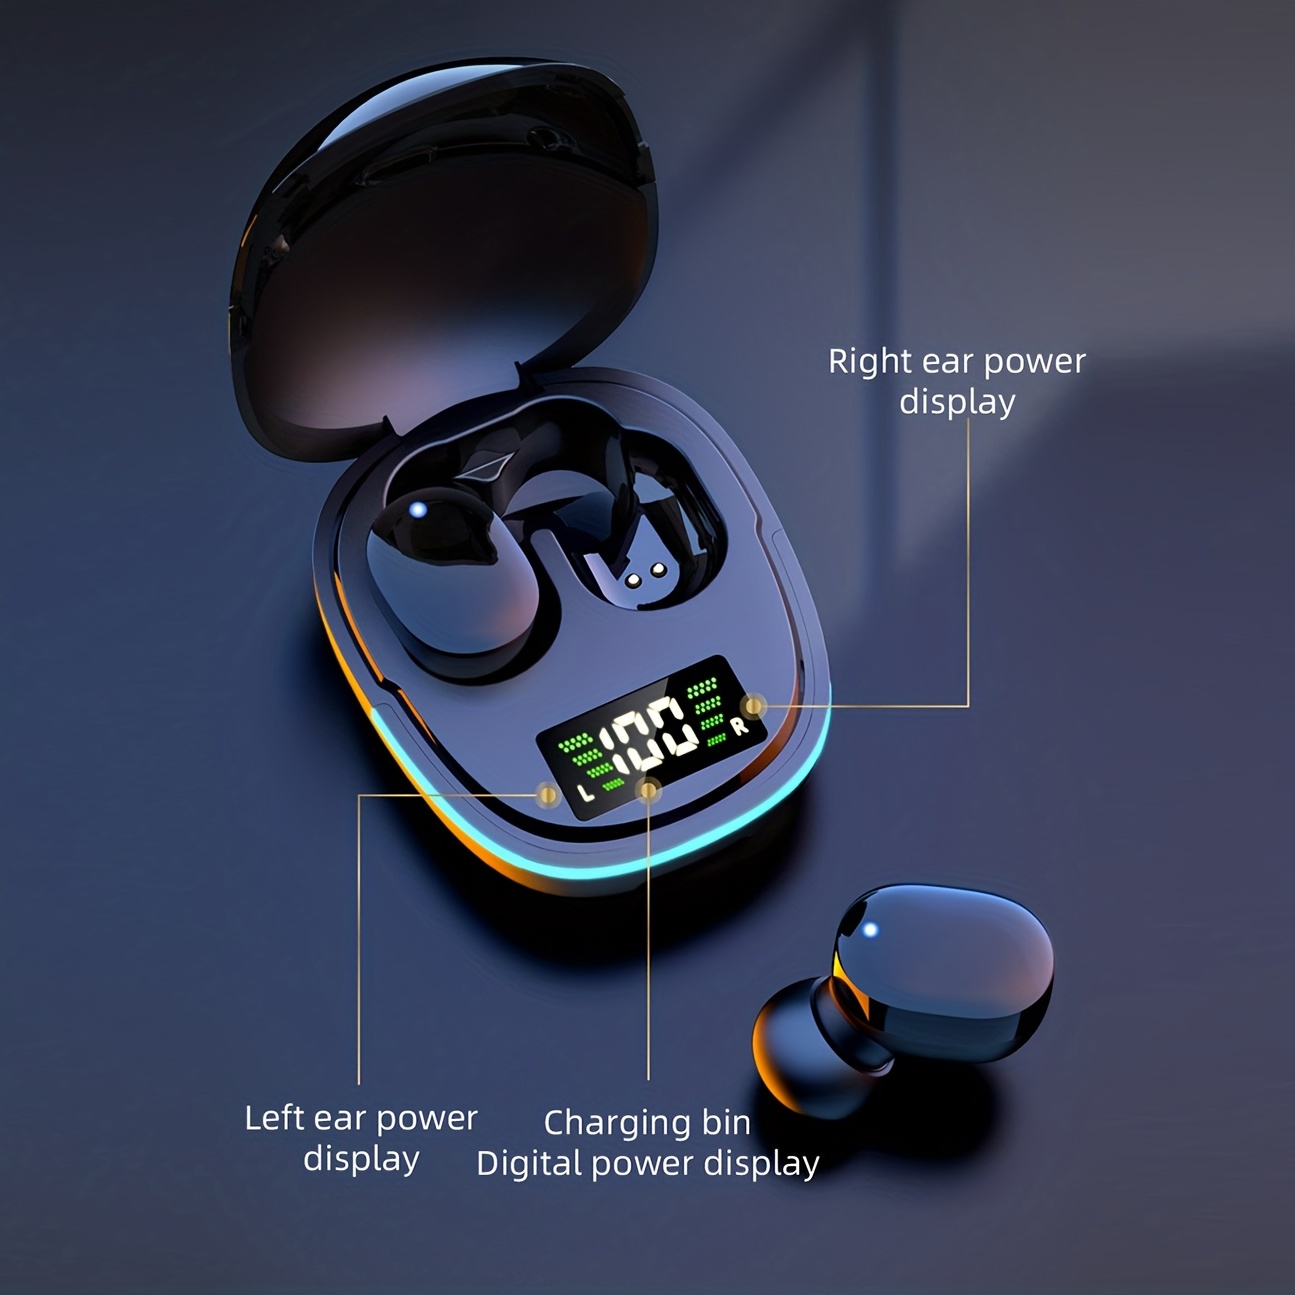 TWS V5.3 True Wireless Stereo Earbuds, TWS Gaming Hands-Free Earphones, Touch Button, Low Latency Earphones, Dual Connection, Waterproof IPX4 Earphones, With RGB Light Charging Case, Built-in Mic, For Smartphone For Android And For IOS System